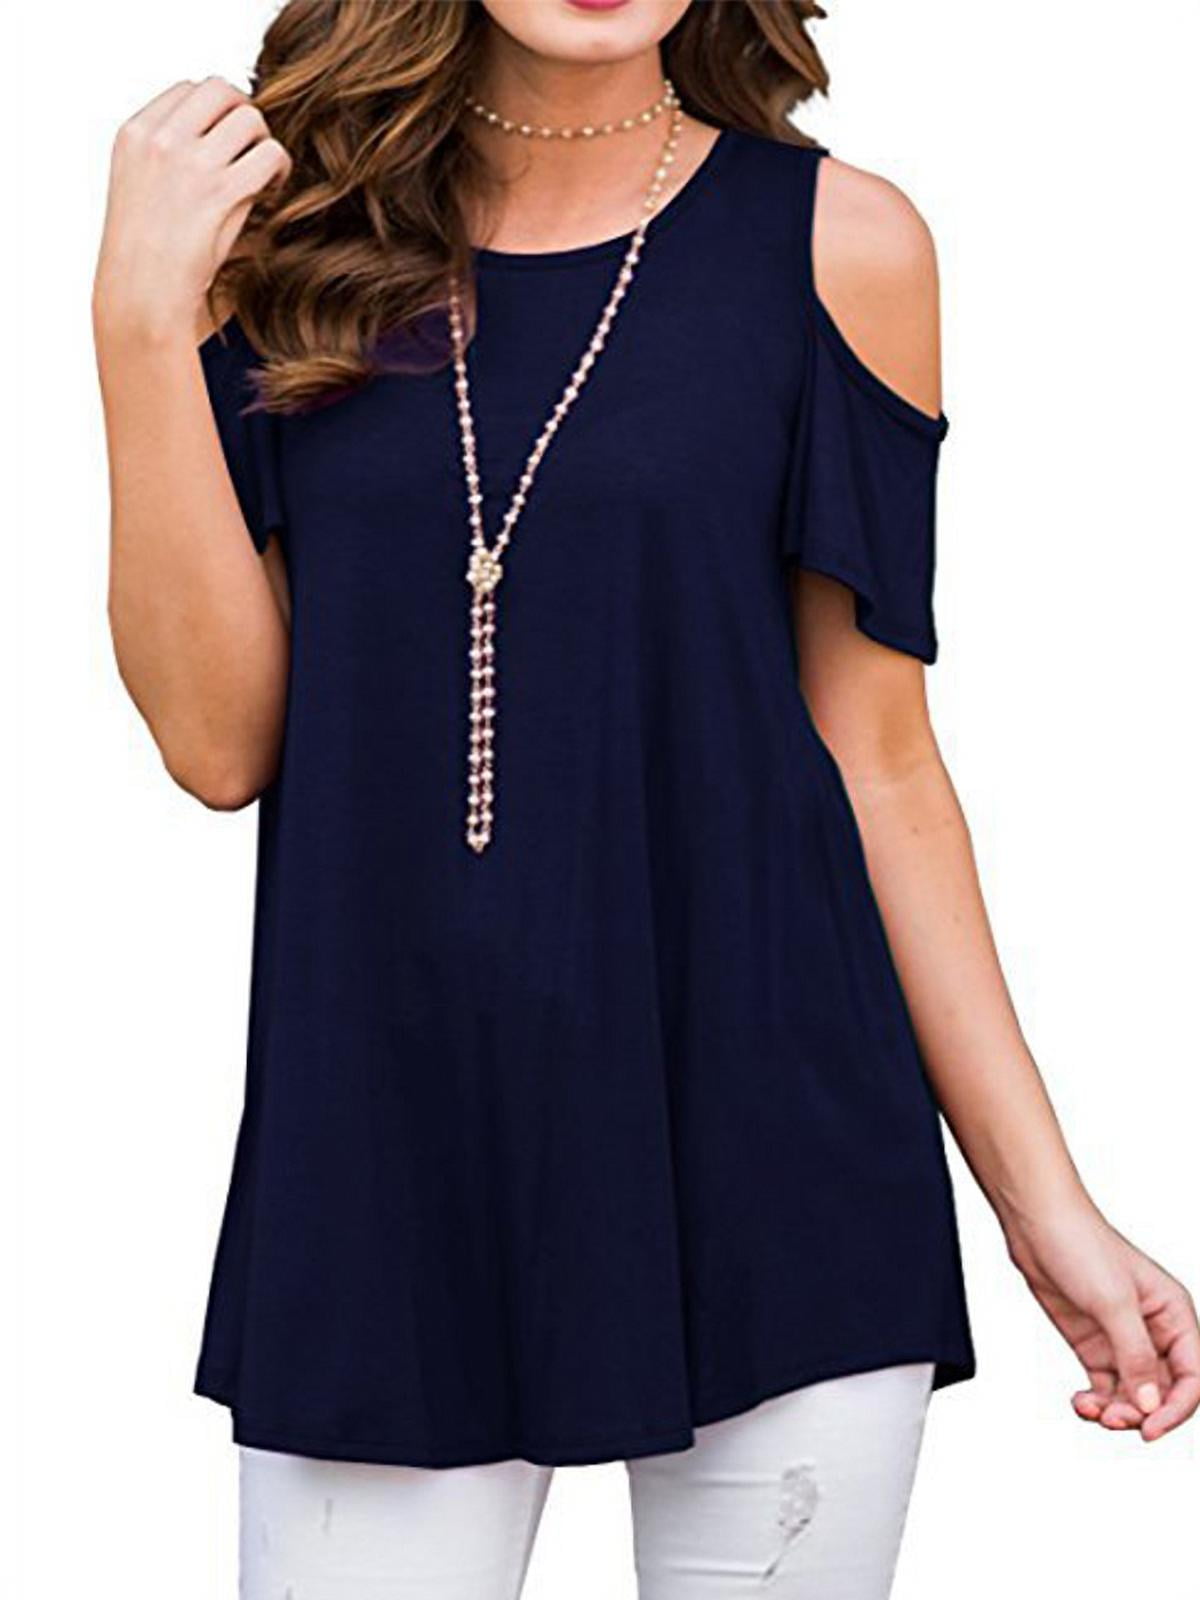 JustVH Women's Cold Shoulder Short Sleeve Casual Tunic Tops Loose ...